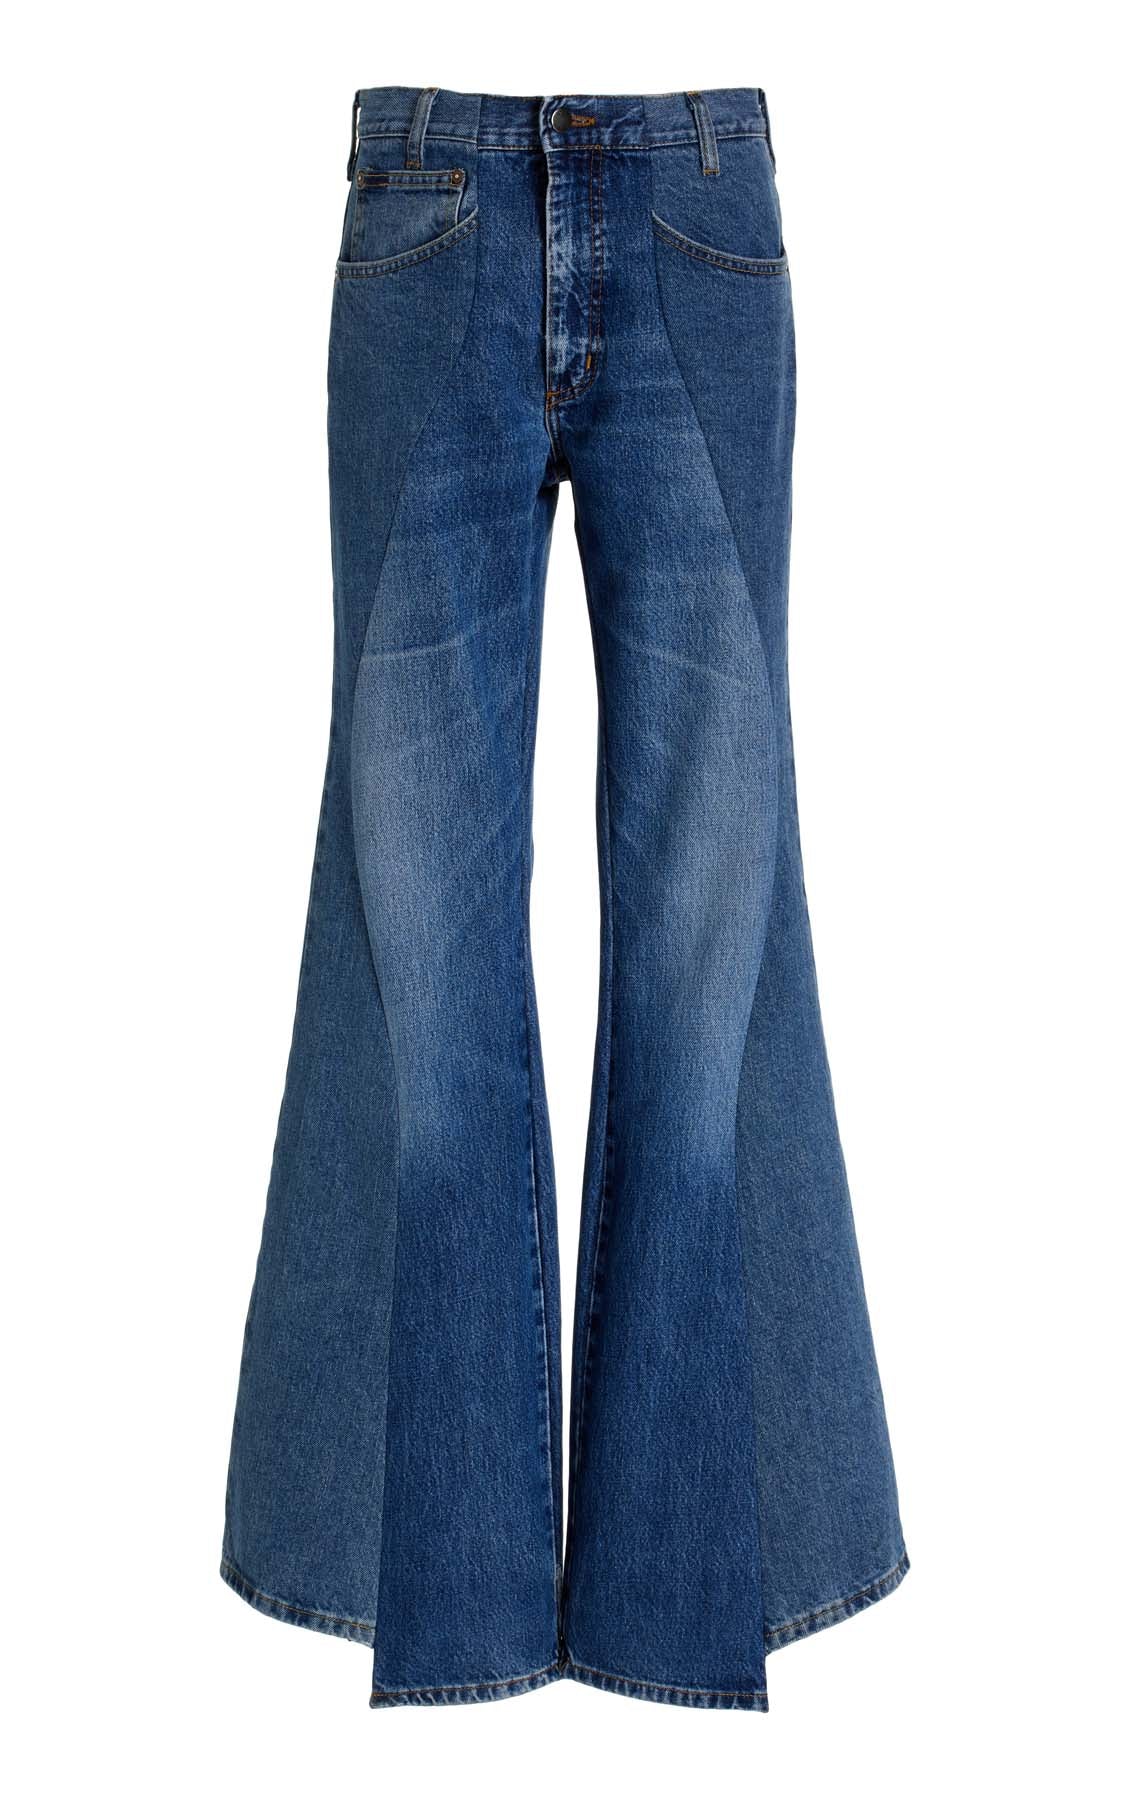 Buy Vintage Style Bell Bottom Jeans// Up-cycled Flared Leg Denim